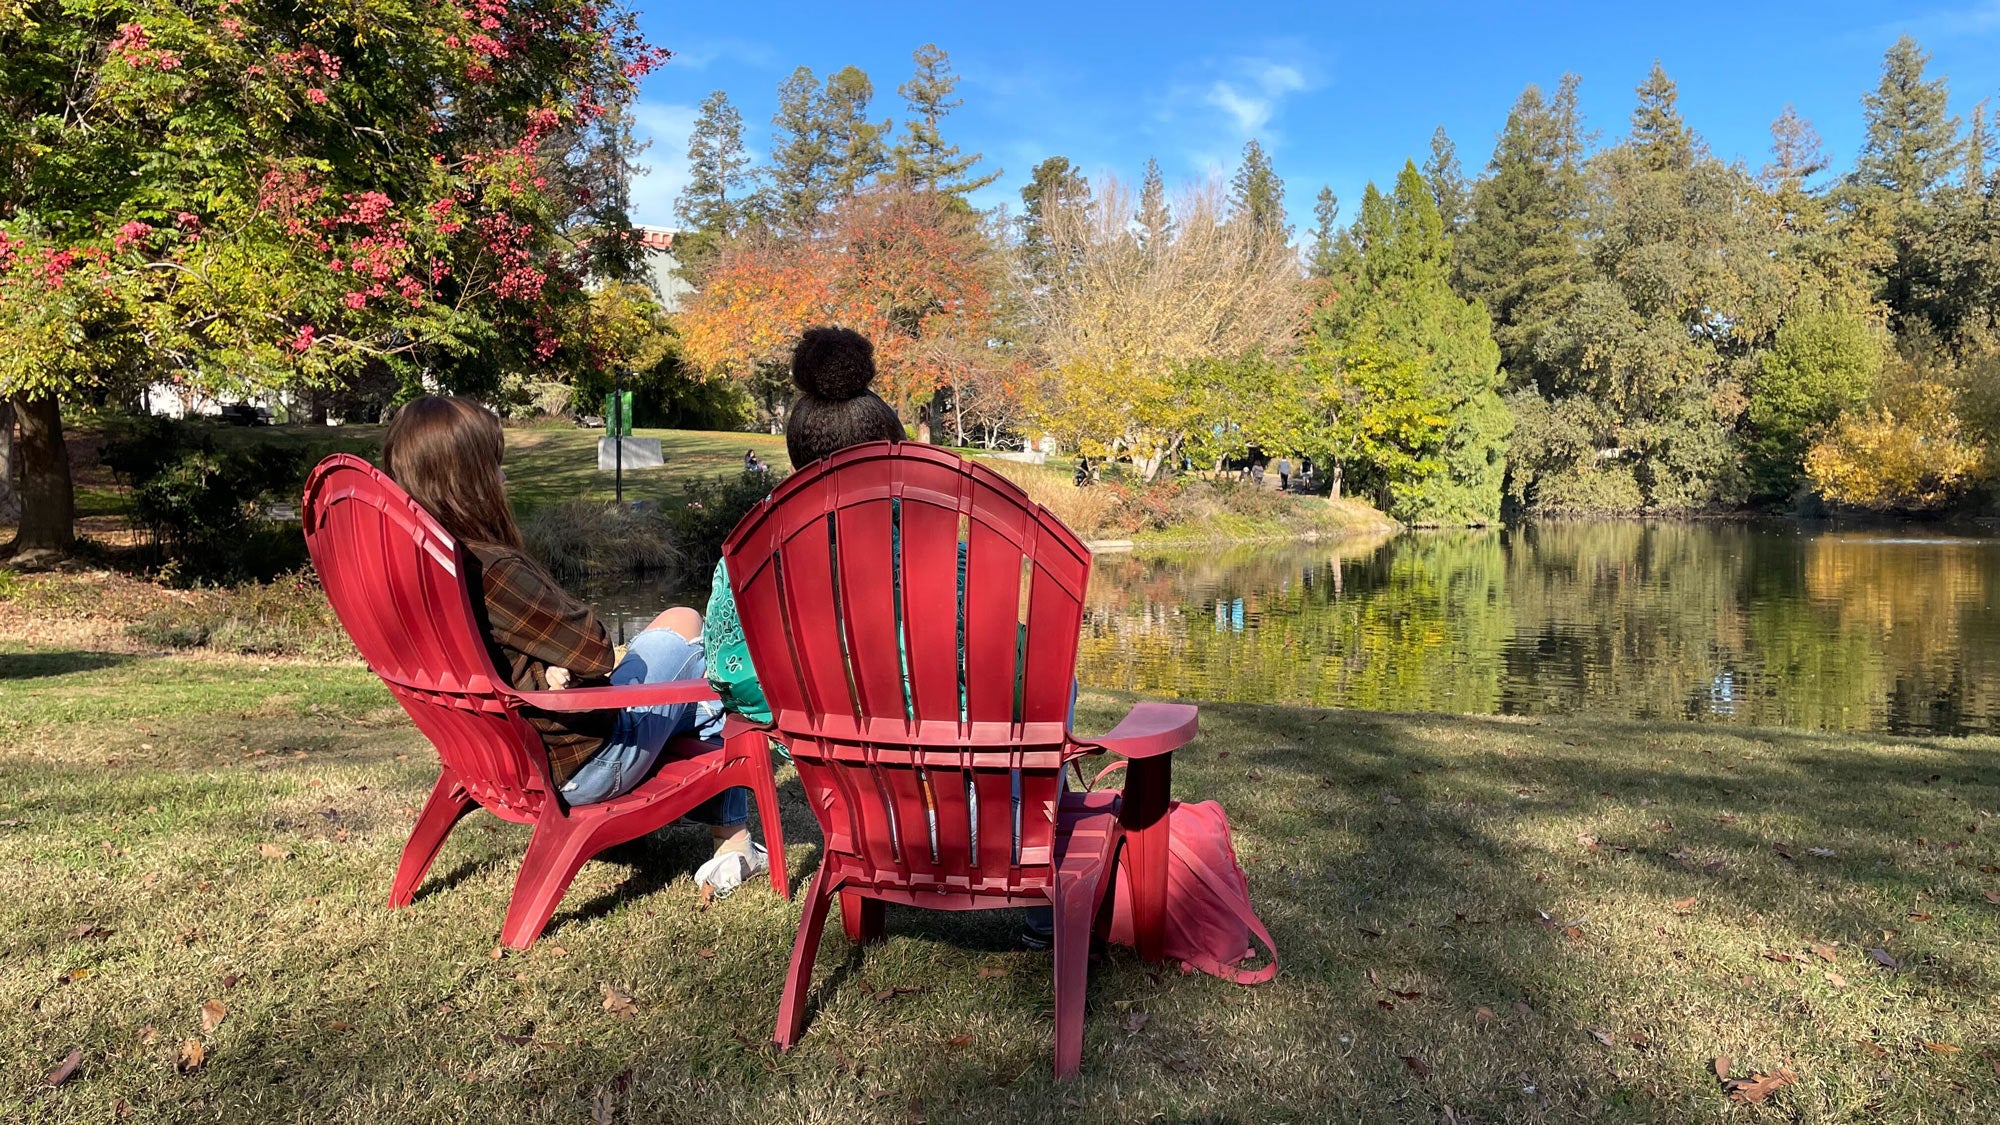 People sit in Adirondack chaiurs along Lake Spafford